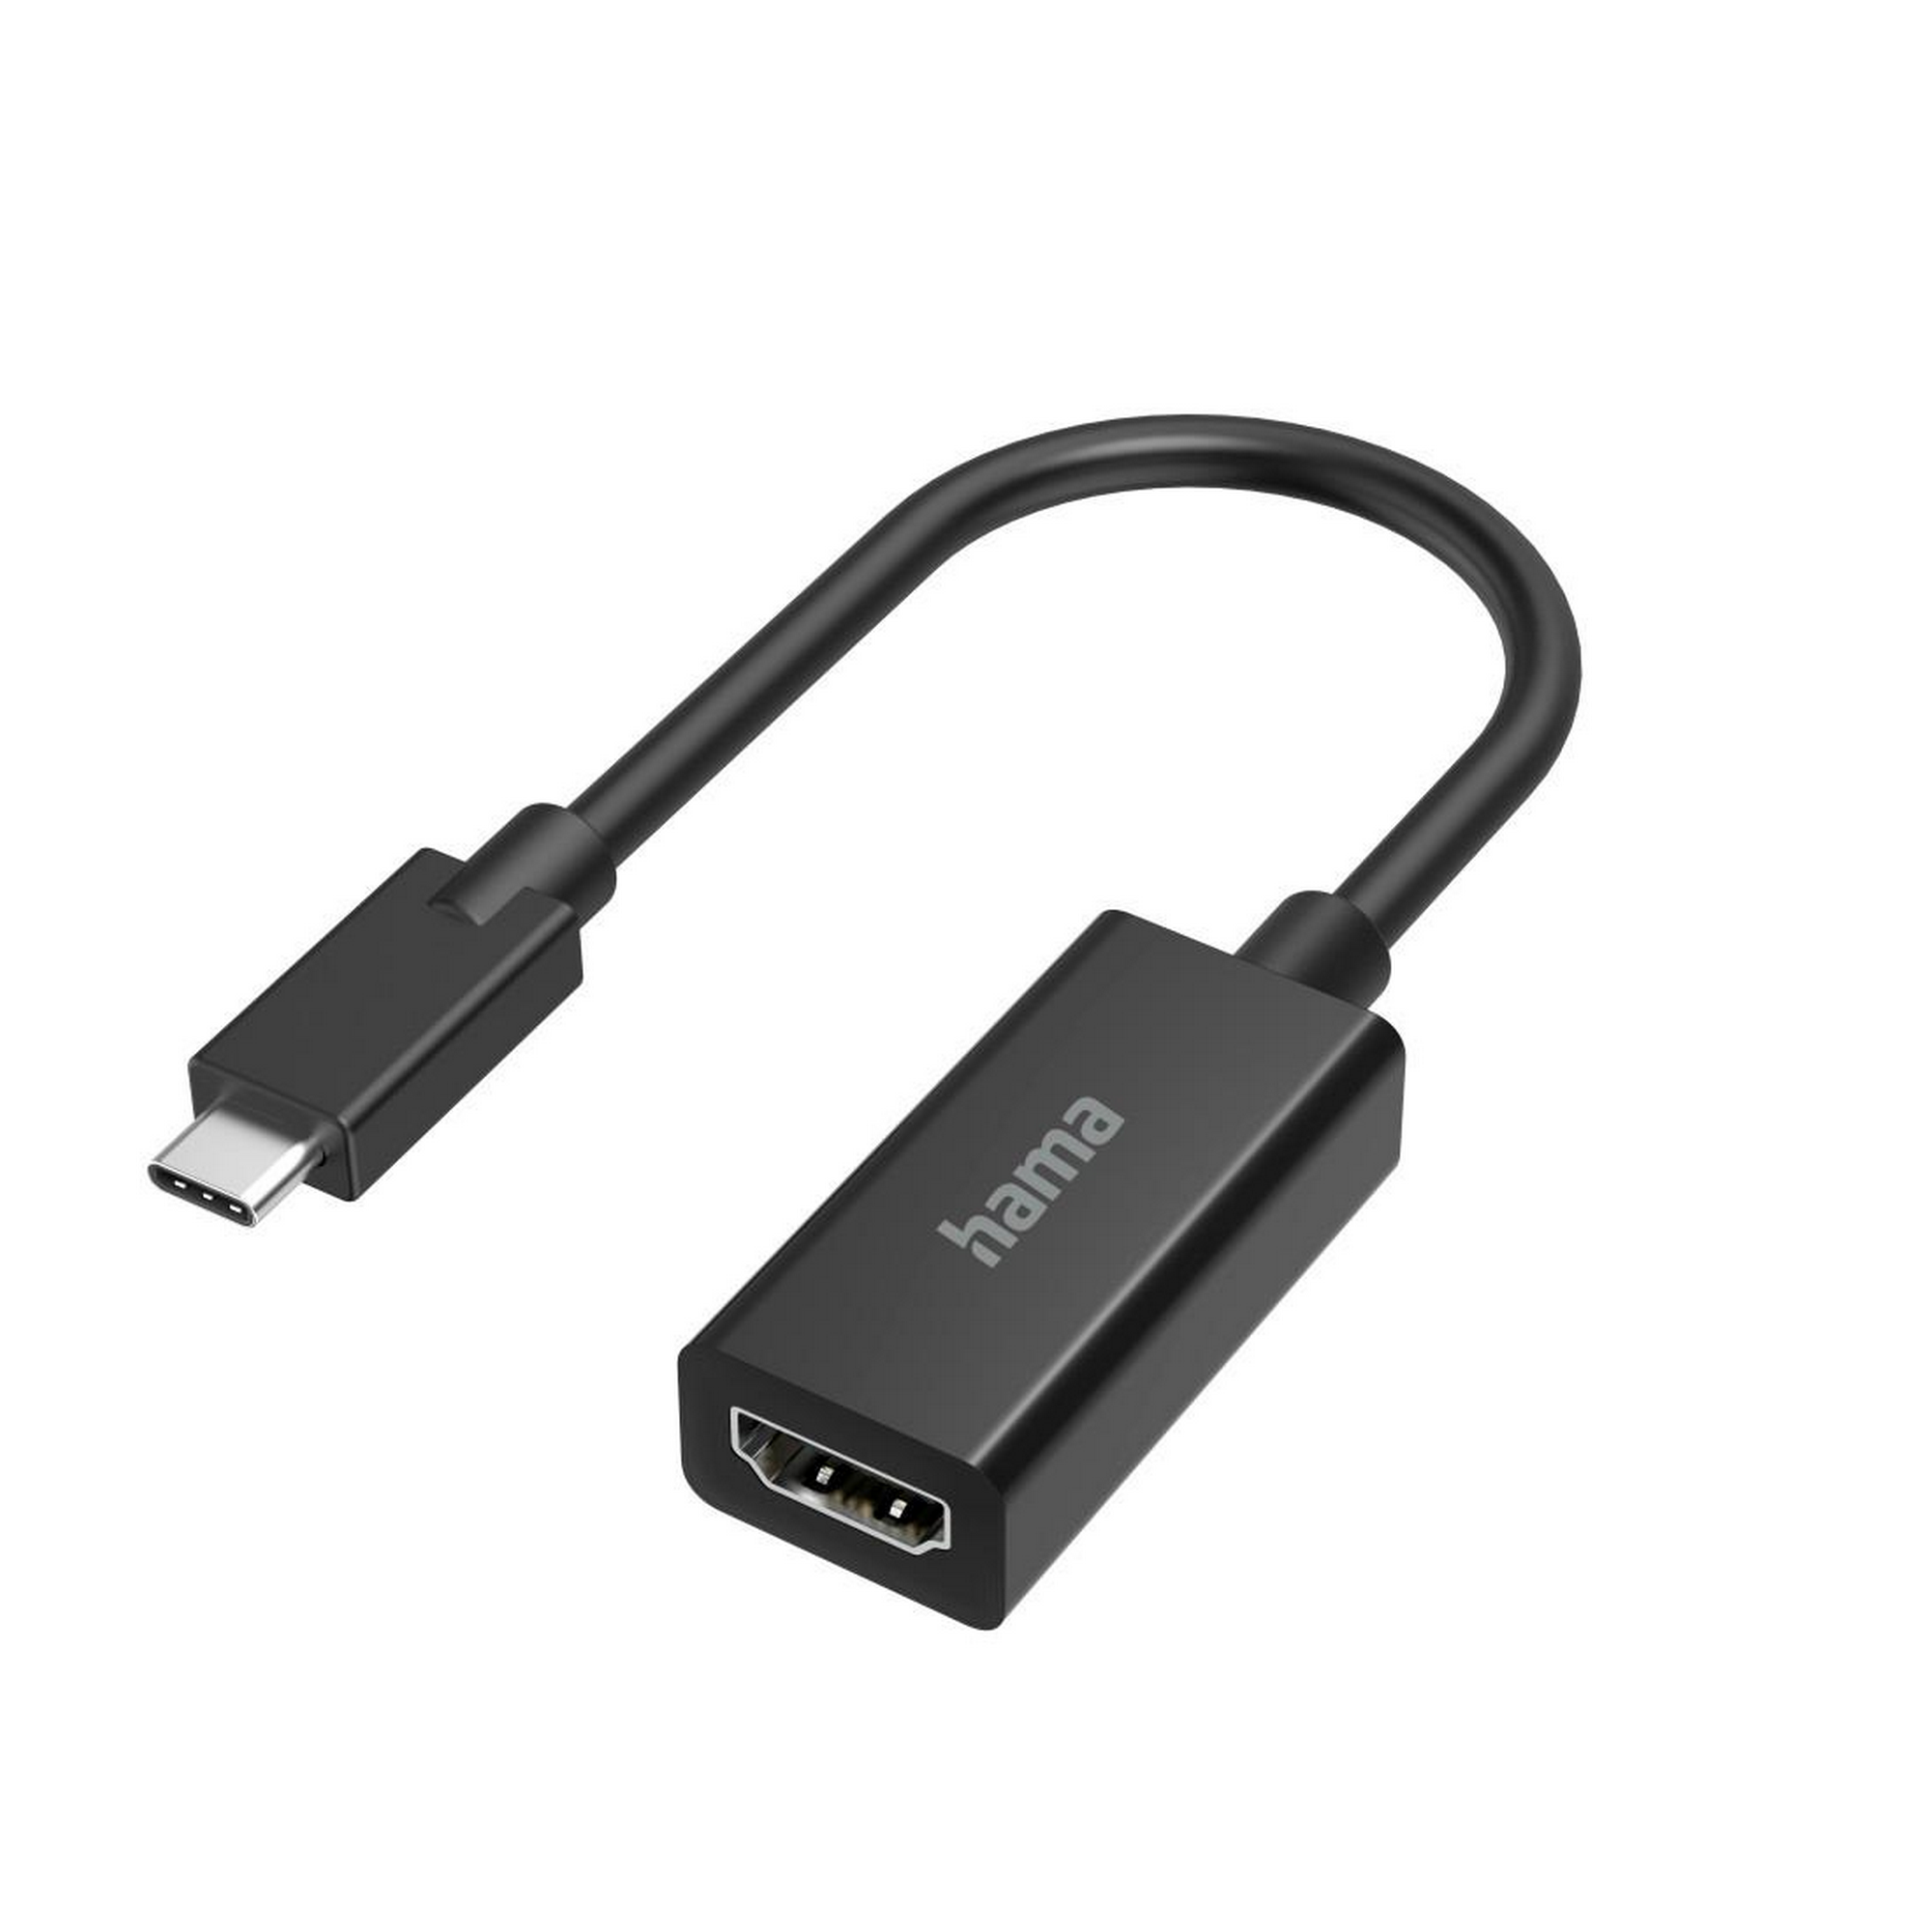 Video-Adapter USB-C-Stecker mit HDMI-Buchse, Ultra-HD 4K + product picture